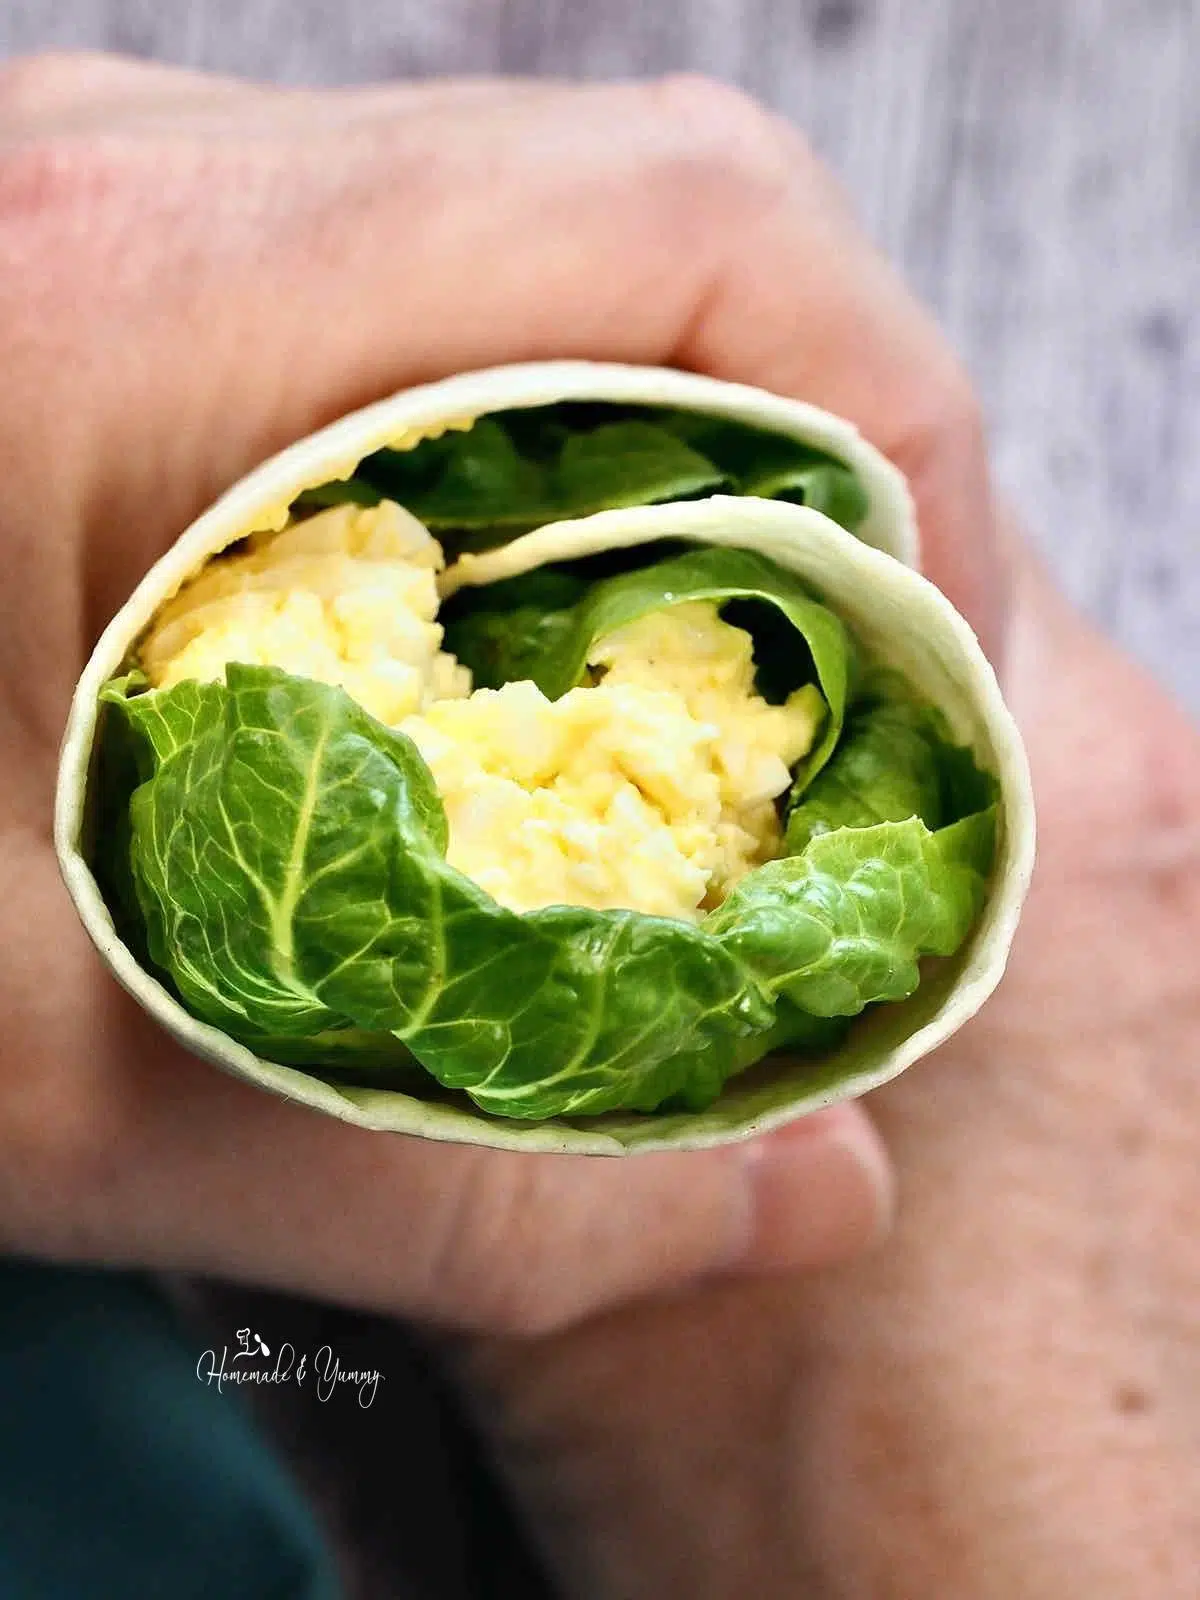 Holding a wrap filled with egg salad filling.